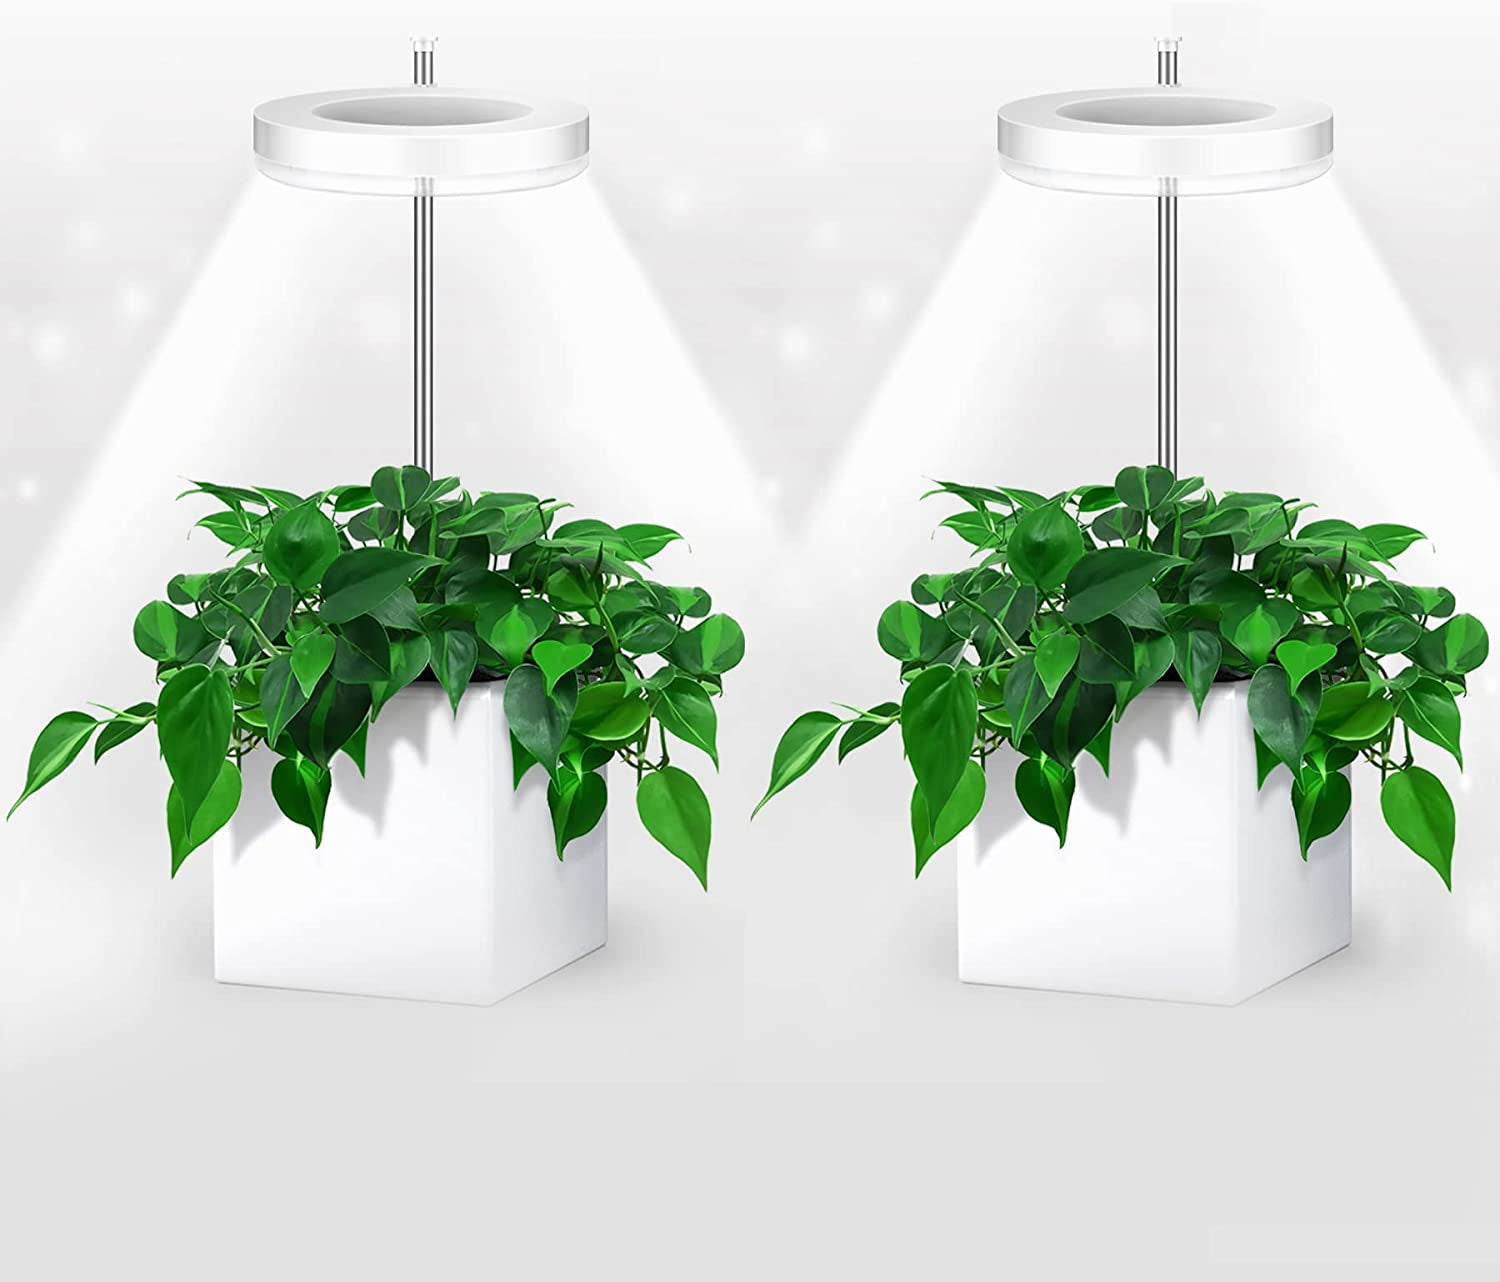 eWonLife, Grow Lights for Indoor Plants, Ewonlife Small Plant Lights Full Spectrum, 2 Pack LED Growing Lamp with Smart Timer, Height Adjustable, 3 Spectrum Modes with Warm White, Blue, Red, for House Growth